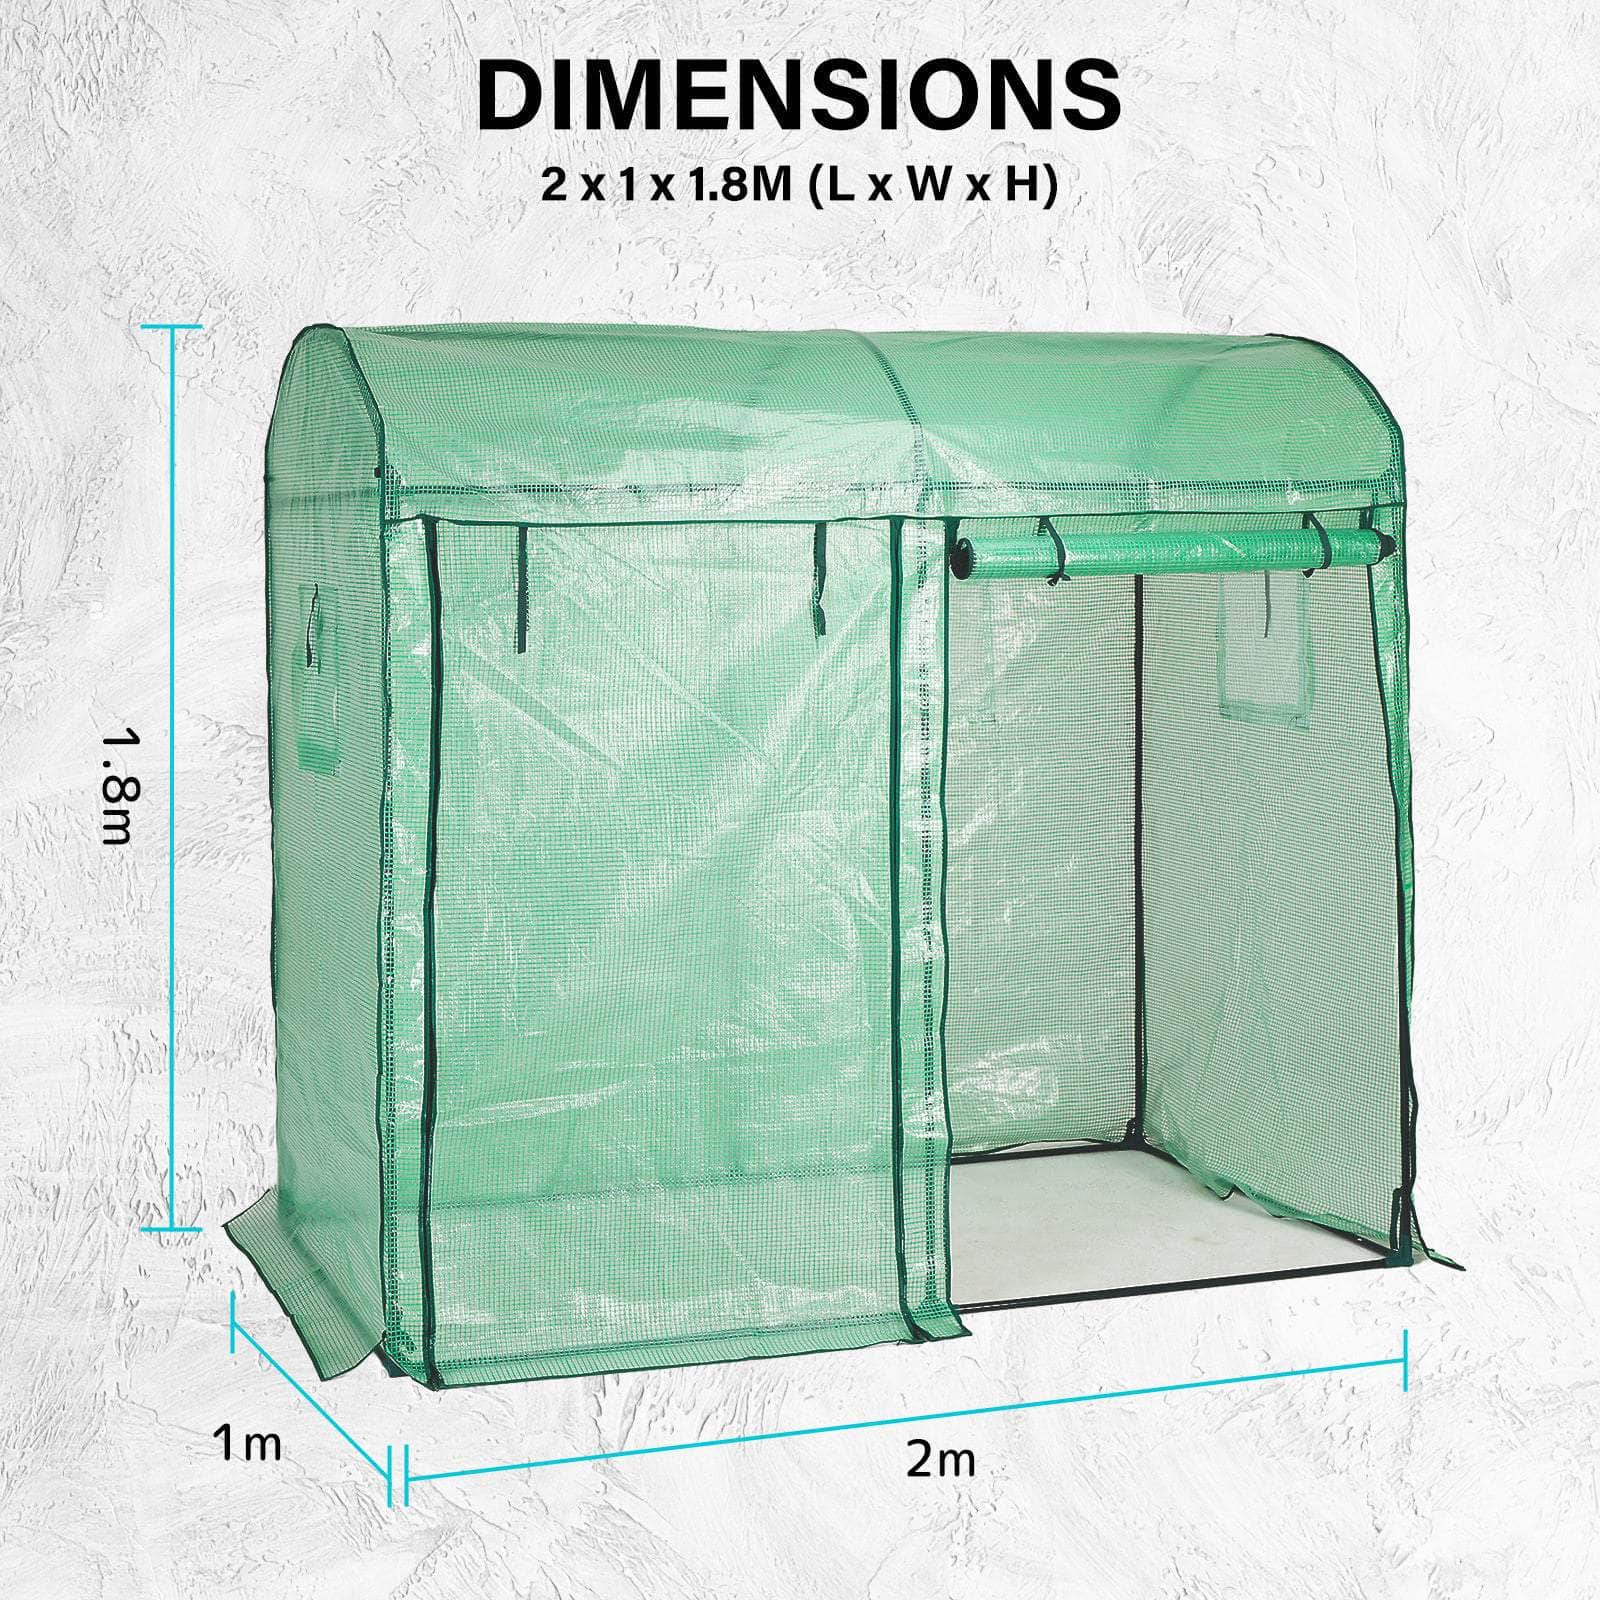 Dome 200Cm Garden Greenhouse Shed Pe Cover Only